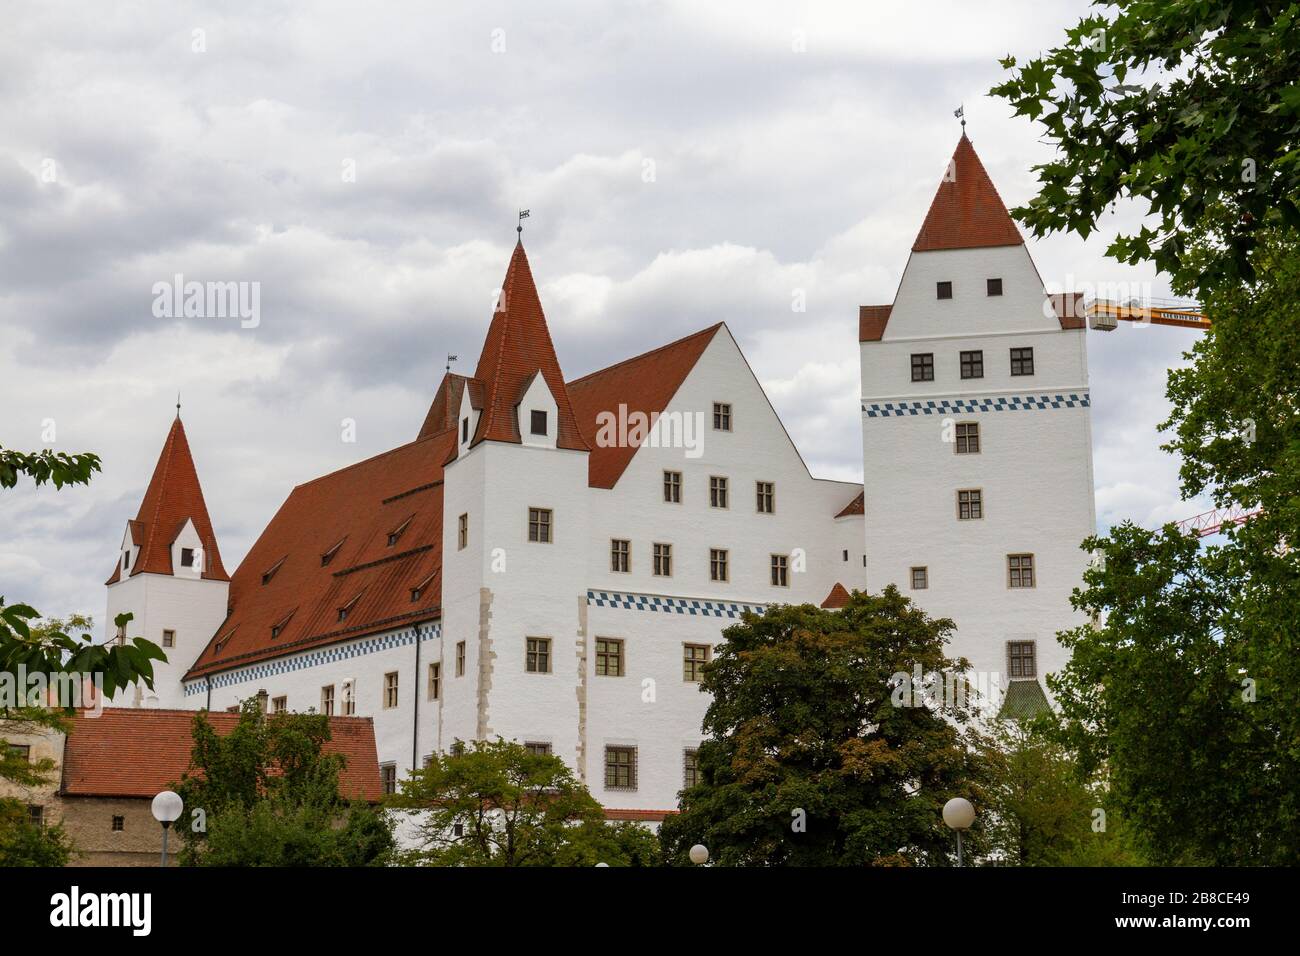 The Neues Schloss (New Castle) in Ingolstadt, Bavaria, Germany. Stock Photo